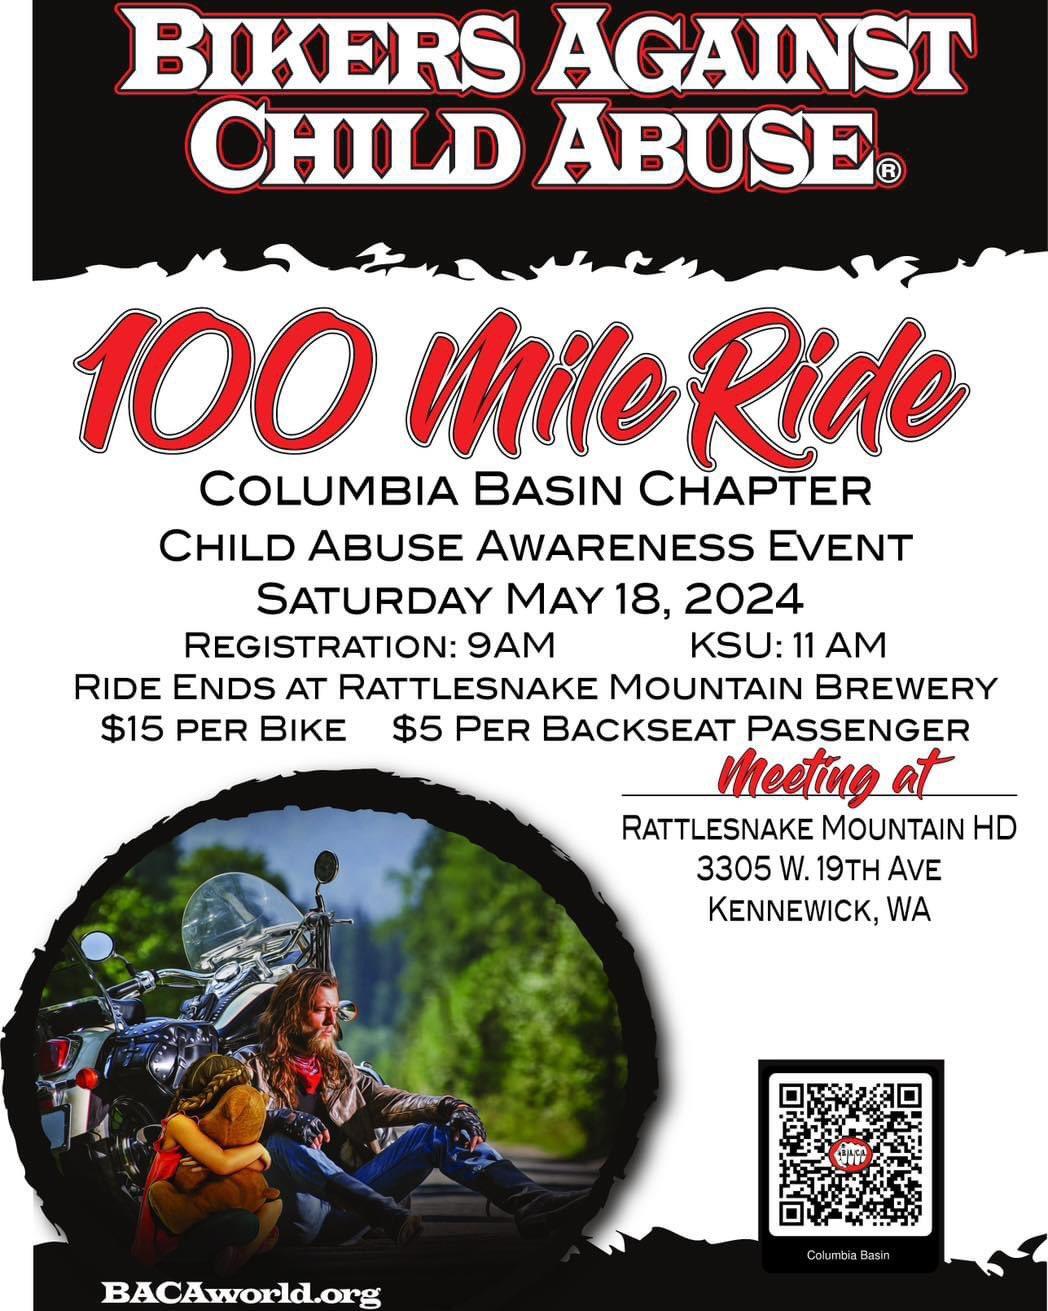 Bikers Against Child Abuse 100 Mile Ride